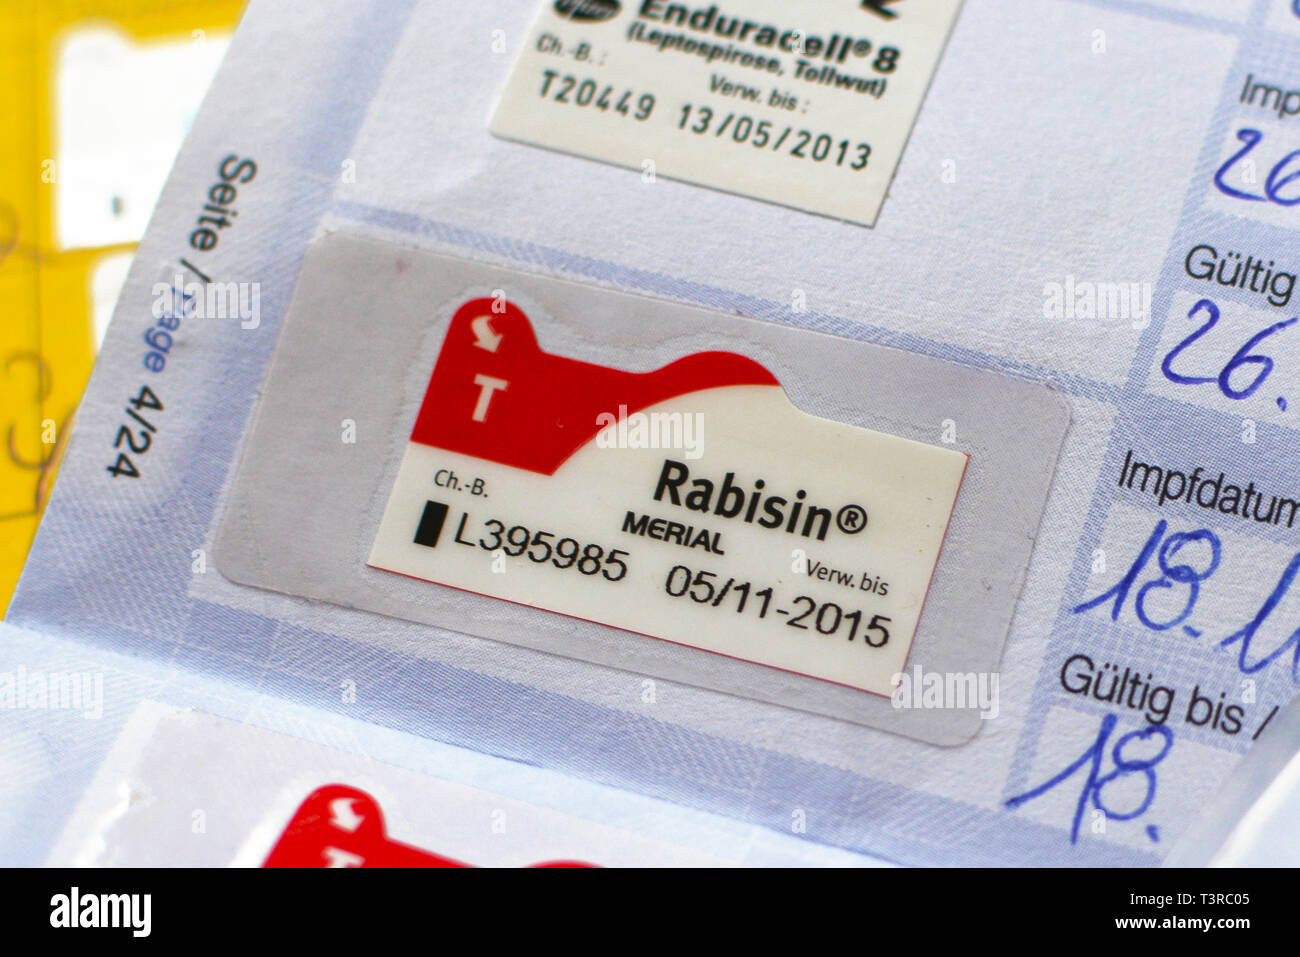 Proof of vaccination against rabies with vaccine called 'Rabisin' in European dog pet passport allowing dog to travel within European Union Stock Photo